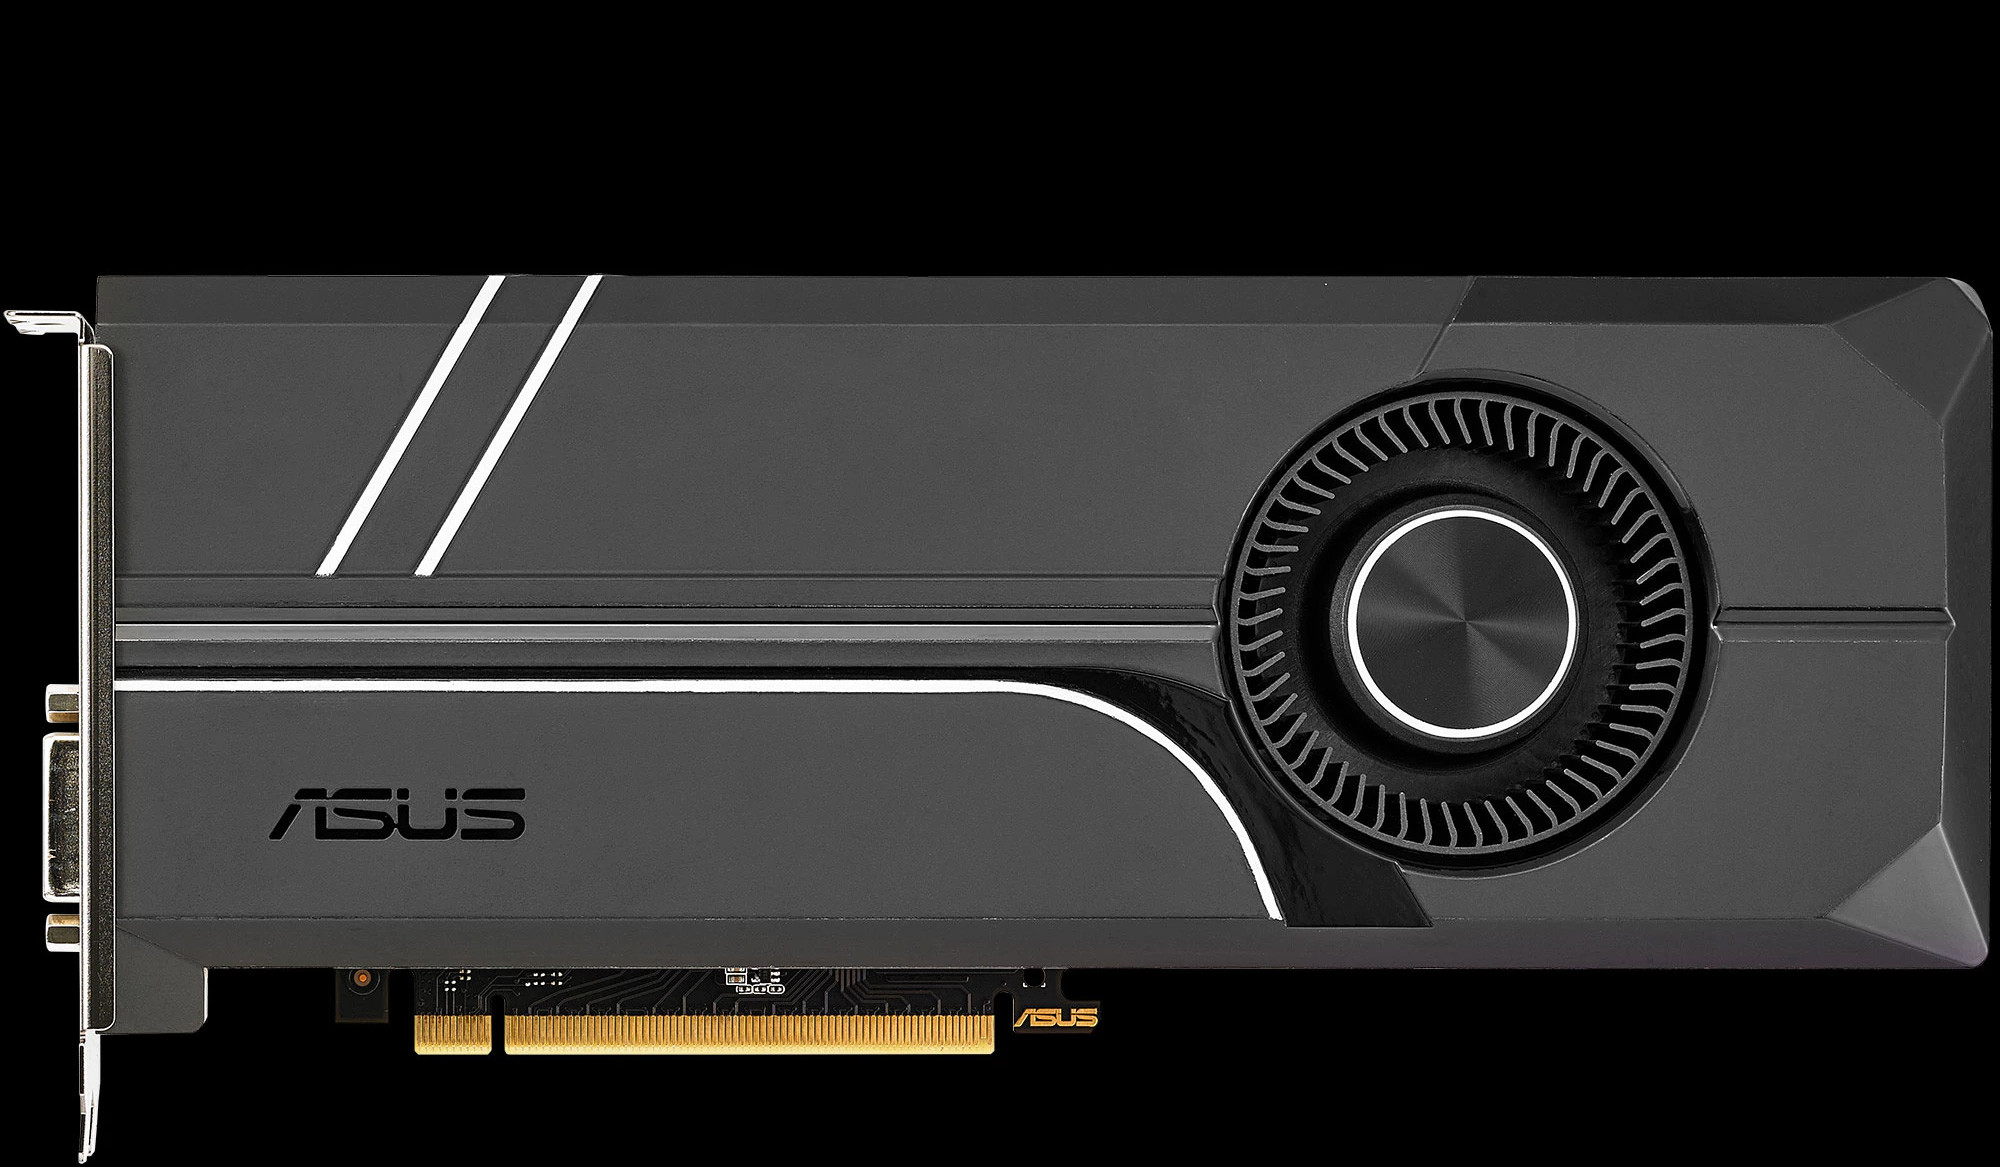 ASUS Announces its ROG Strix and Turbo GeForce GTX 1070 Ti